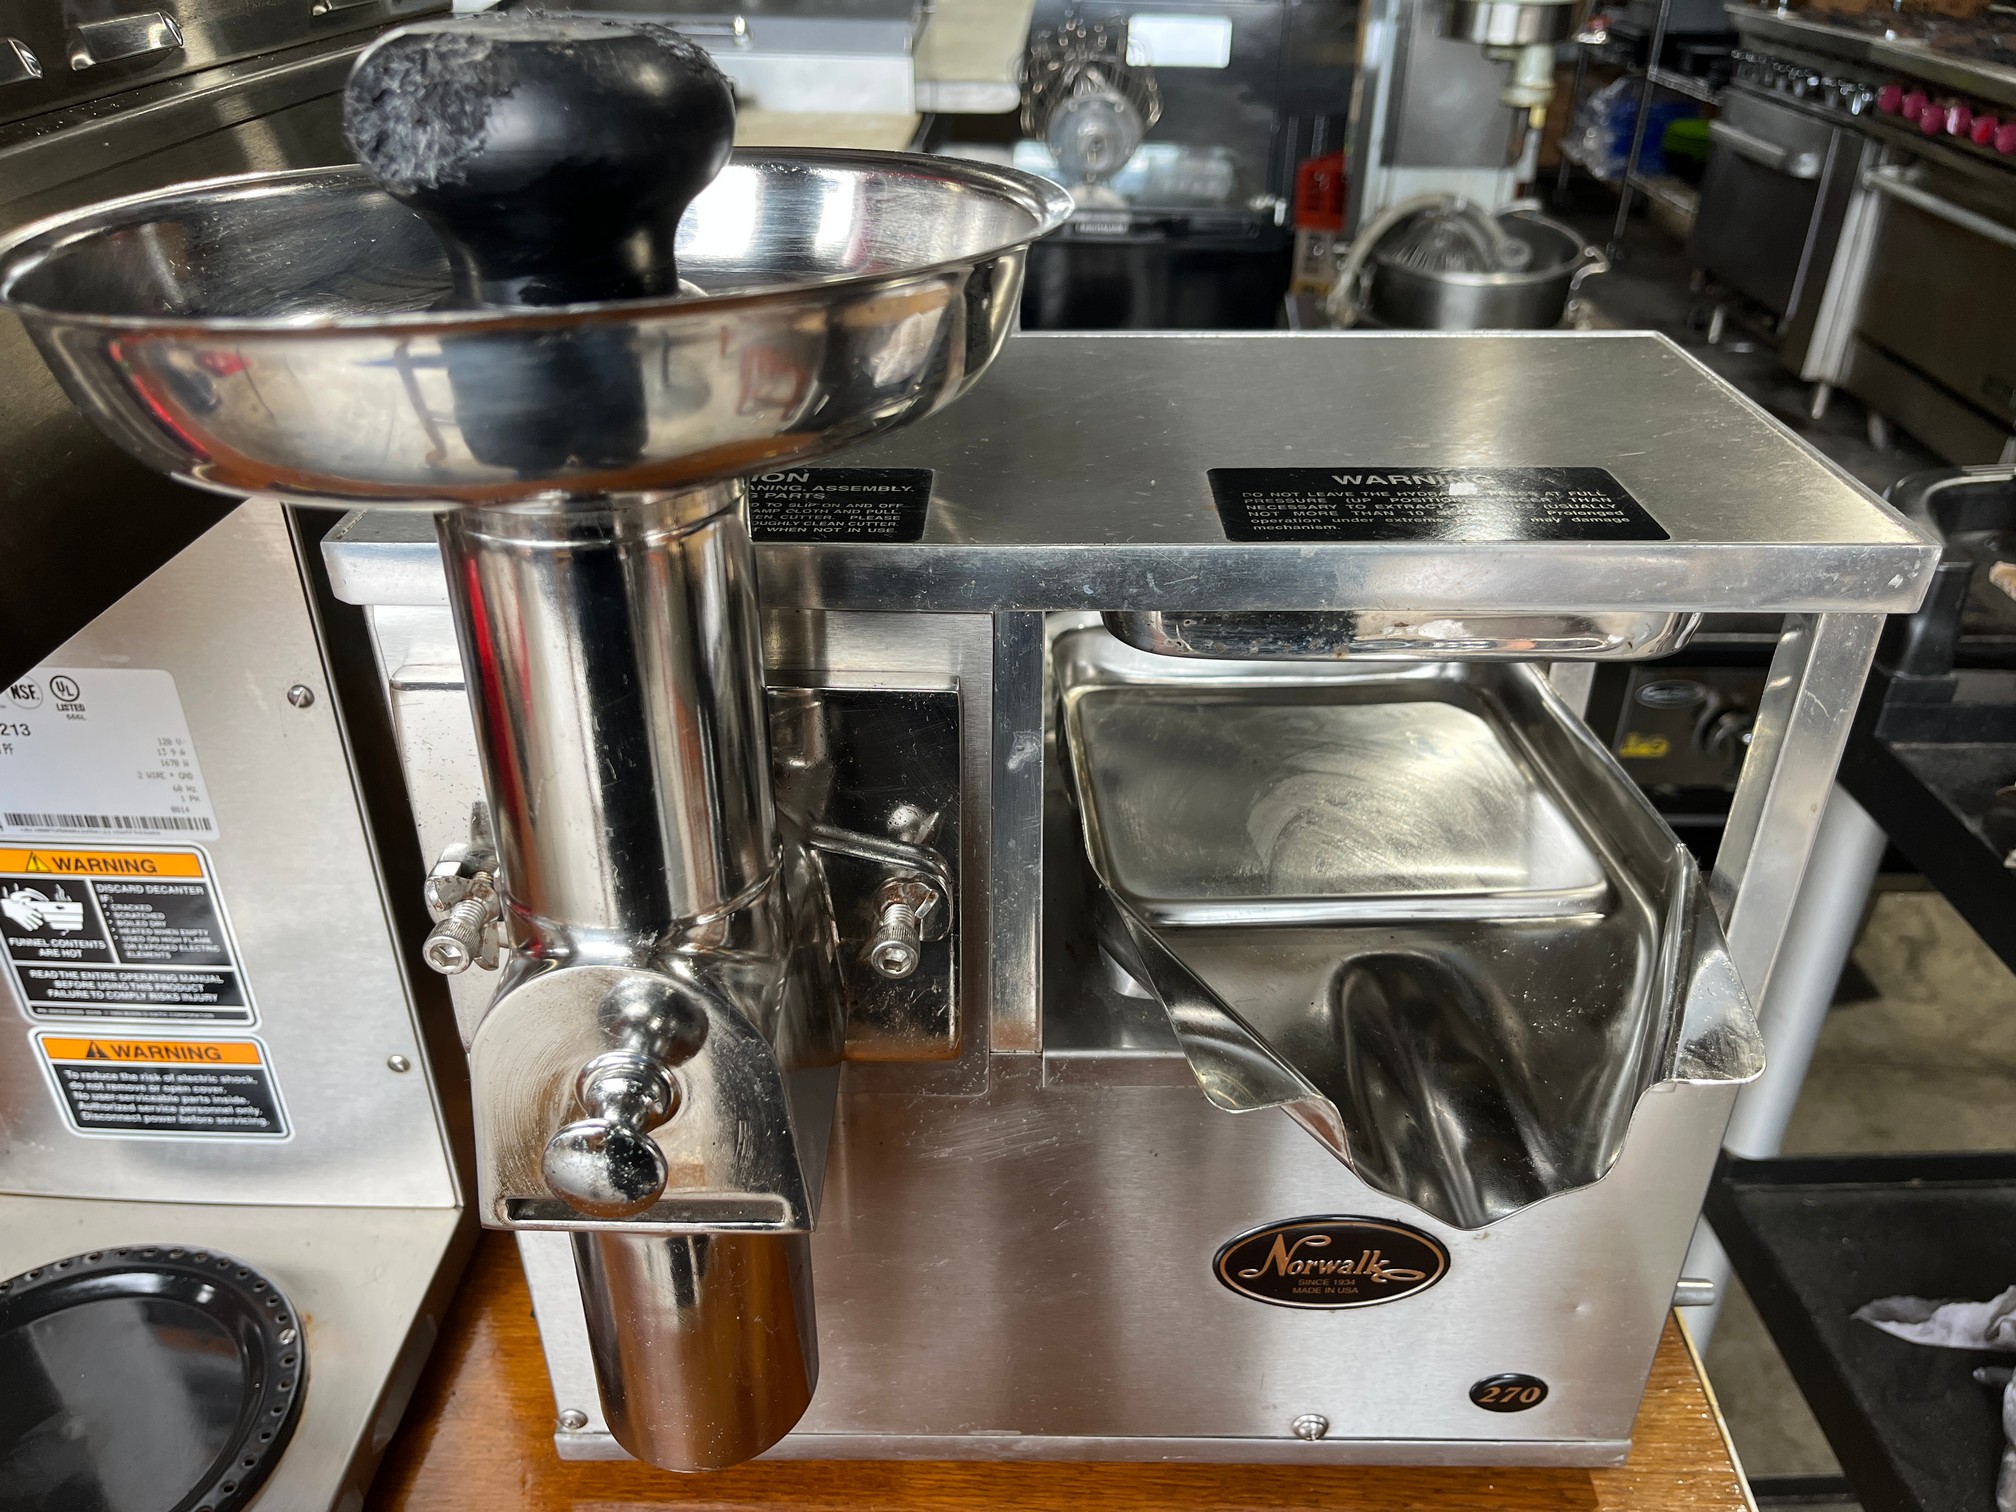 For Reliable Parts And Service of Your Norwalk Juicer